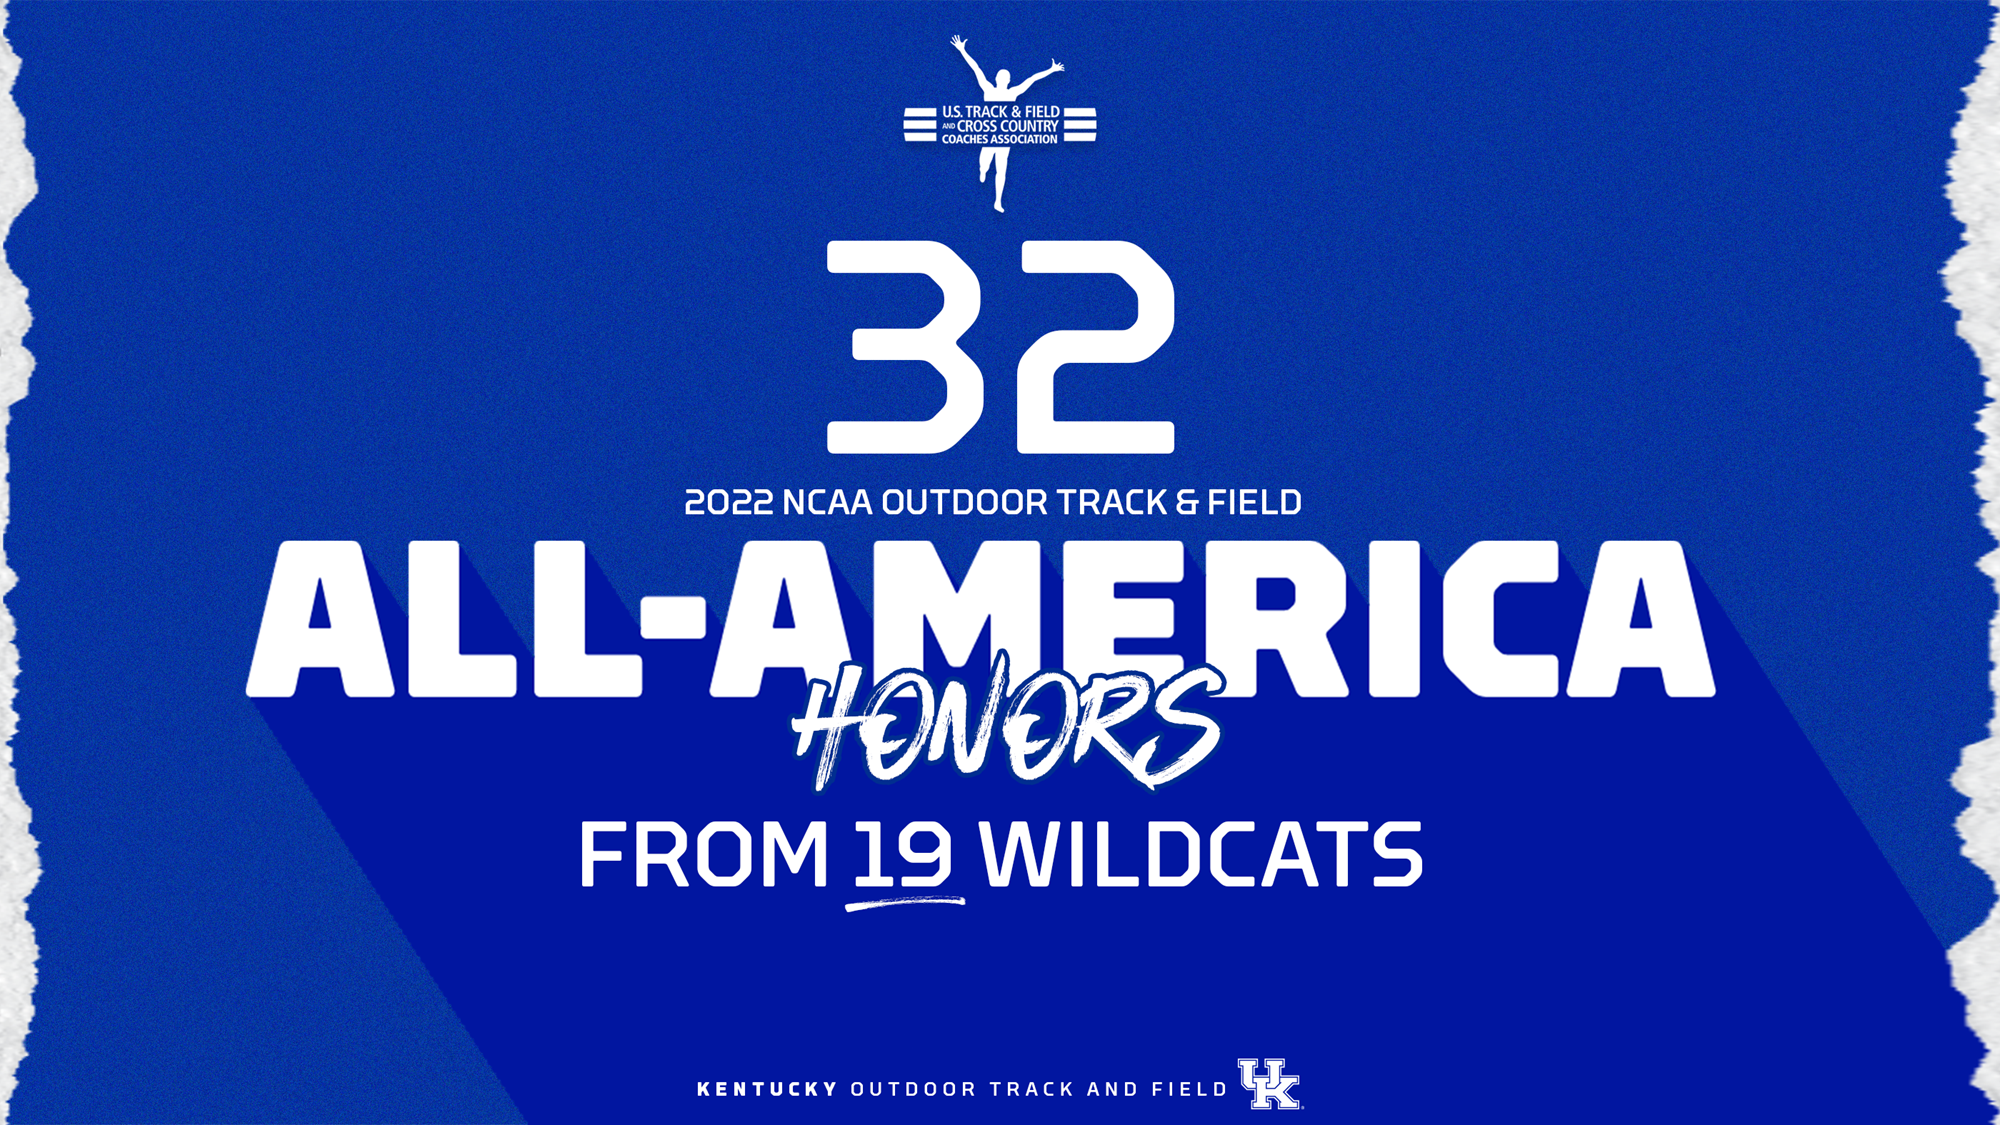 UKTF Earns 32 All-America Honors from 19 Wildcats